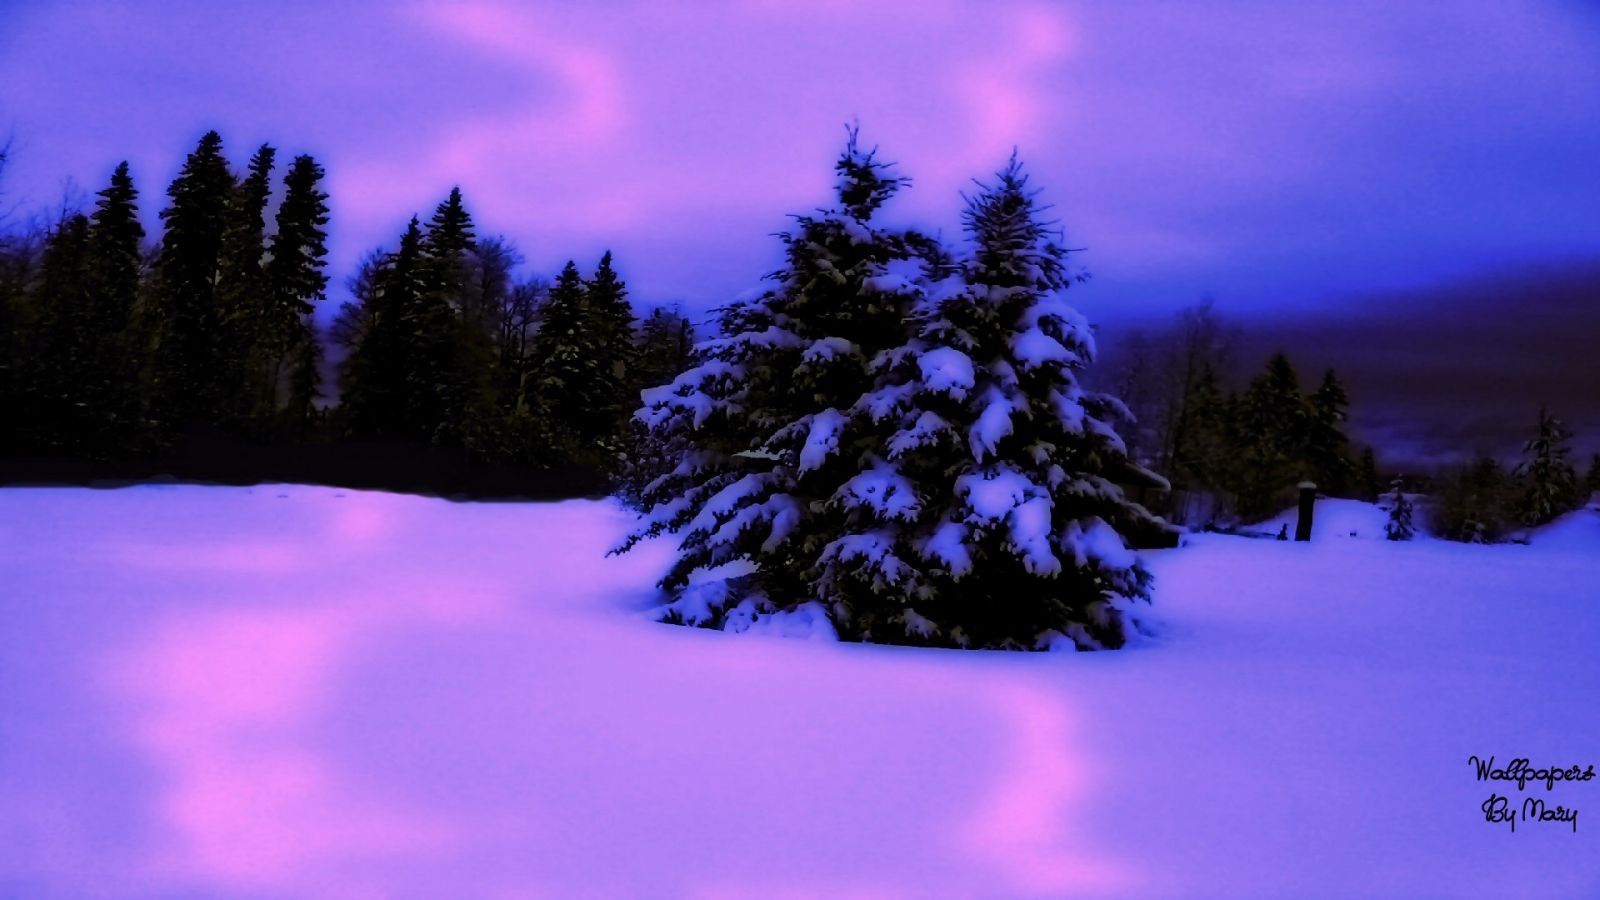 Free download Pink And Purple Winter 1920x1080 wallpaper ForWallpapercom [1920x1080] for your Desktop, Mobile & Tablet. Explore Purple Winter Wallpaper. Pink And Purple Wallpaper, Purple Desktop Wallpaper, Purple Wallpaper Background